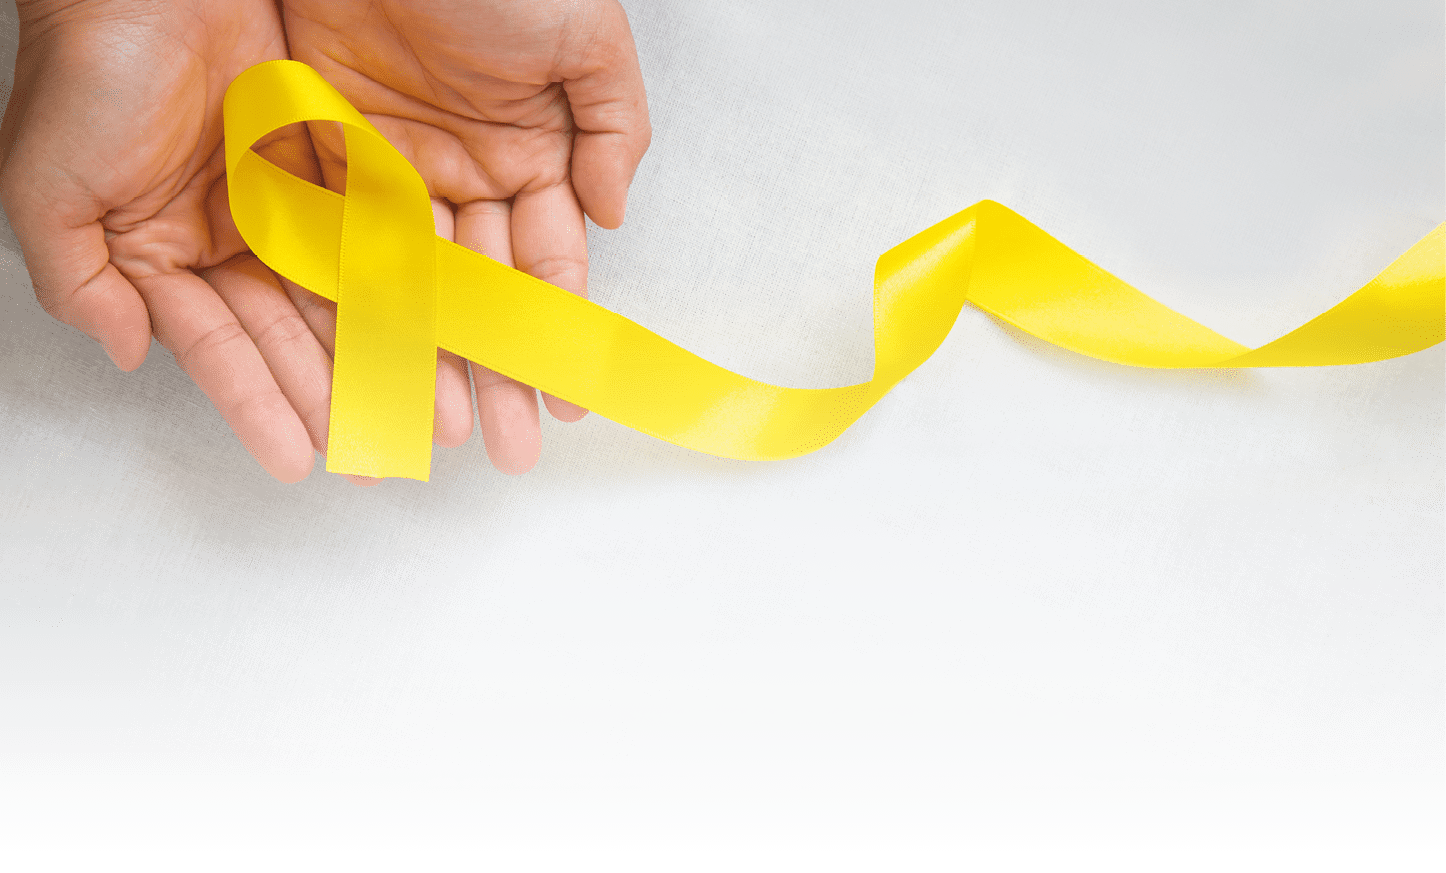 Hand holding Yellow ribbon on white background, copy space  Bone cancer, Sarcoma Awareness, childhood cancer, cholangiocarcinoma, gallbladder cancer, world Suicide Prevention Day  Health concept 